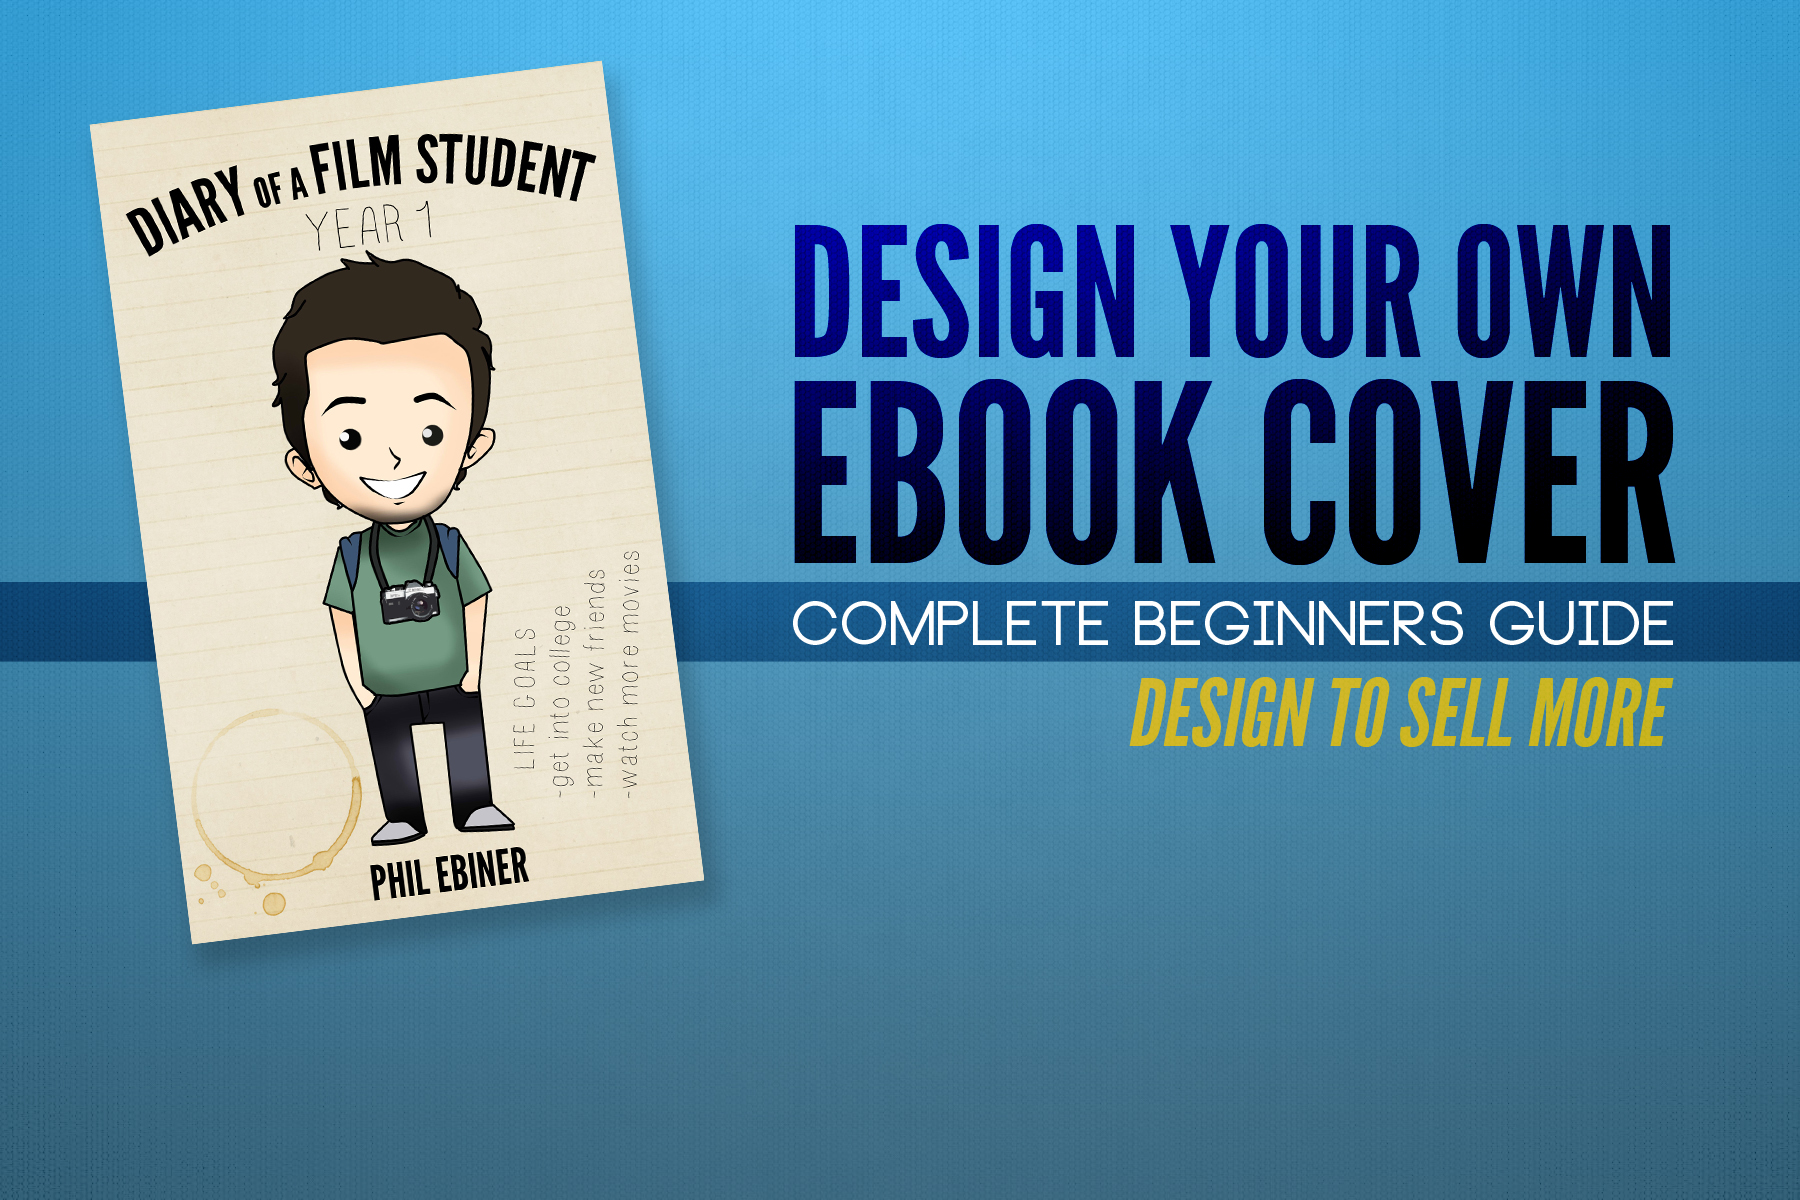 How to design ebook covers?